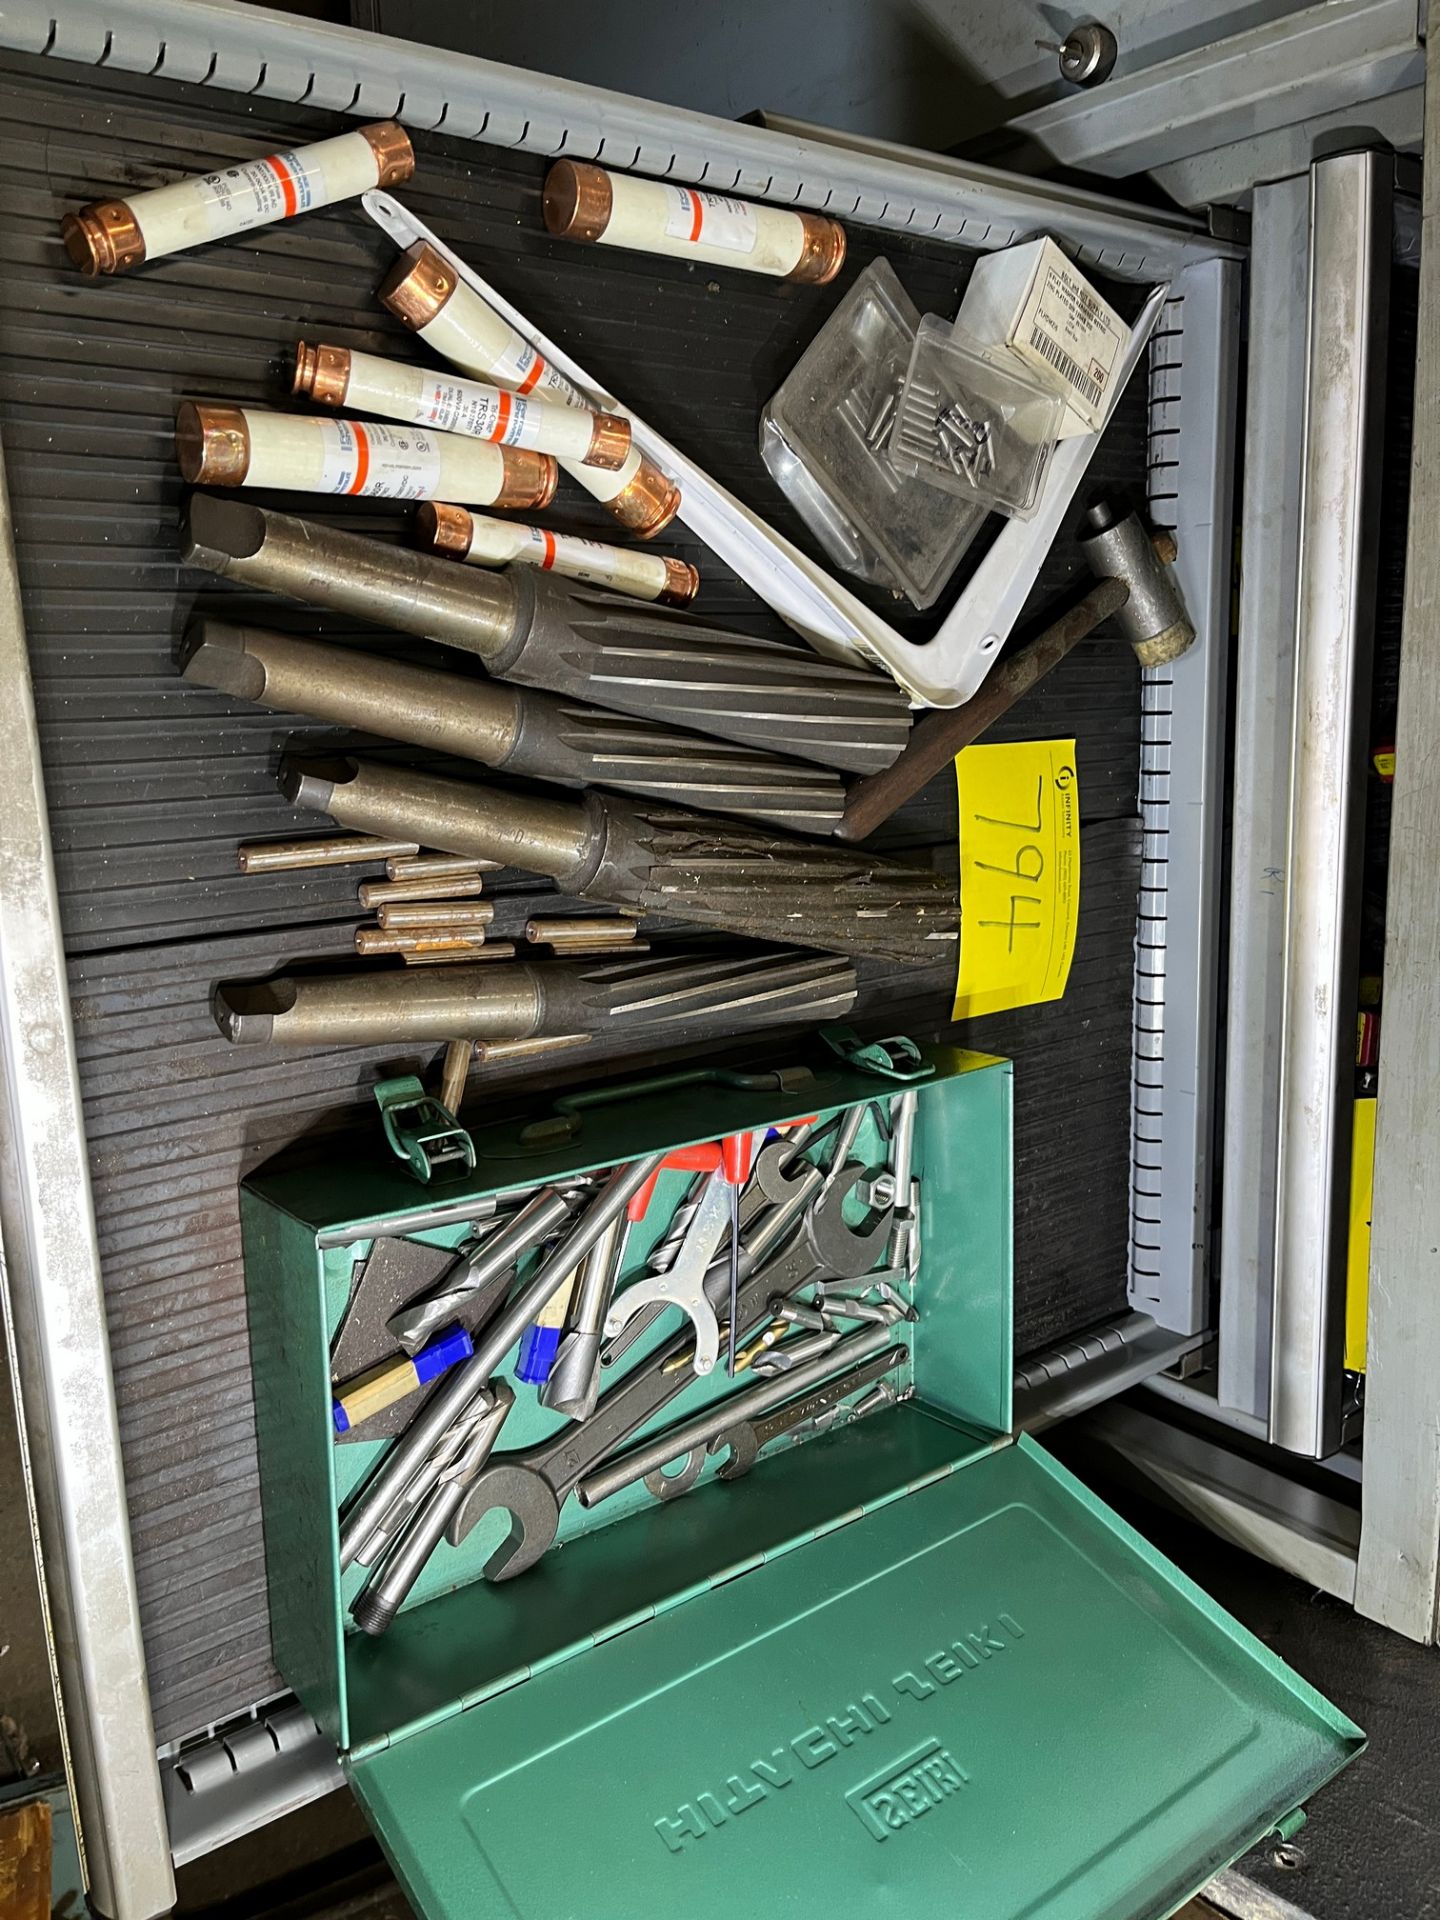 CONTENTS OF (2) DRAWERS OF TOOL CABINET INCLUDING REAMERS, FUSES, HAND TOOLS, ETC.